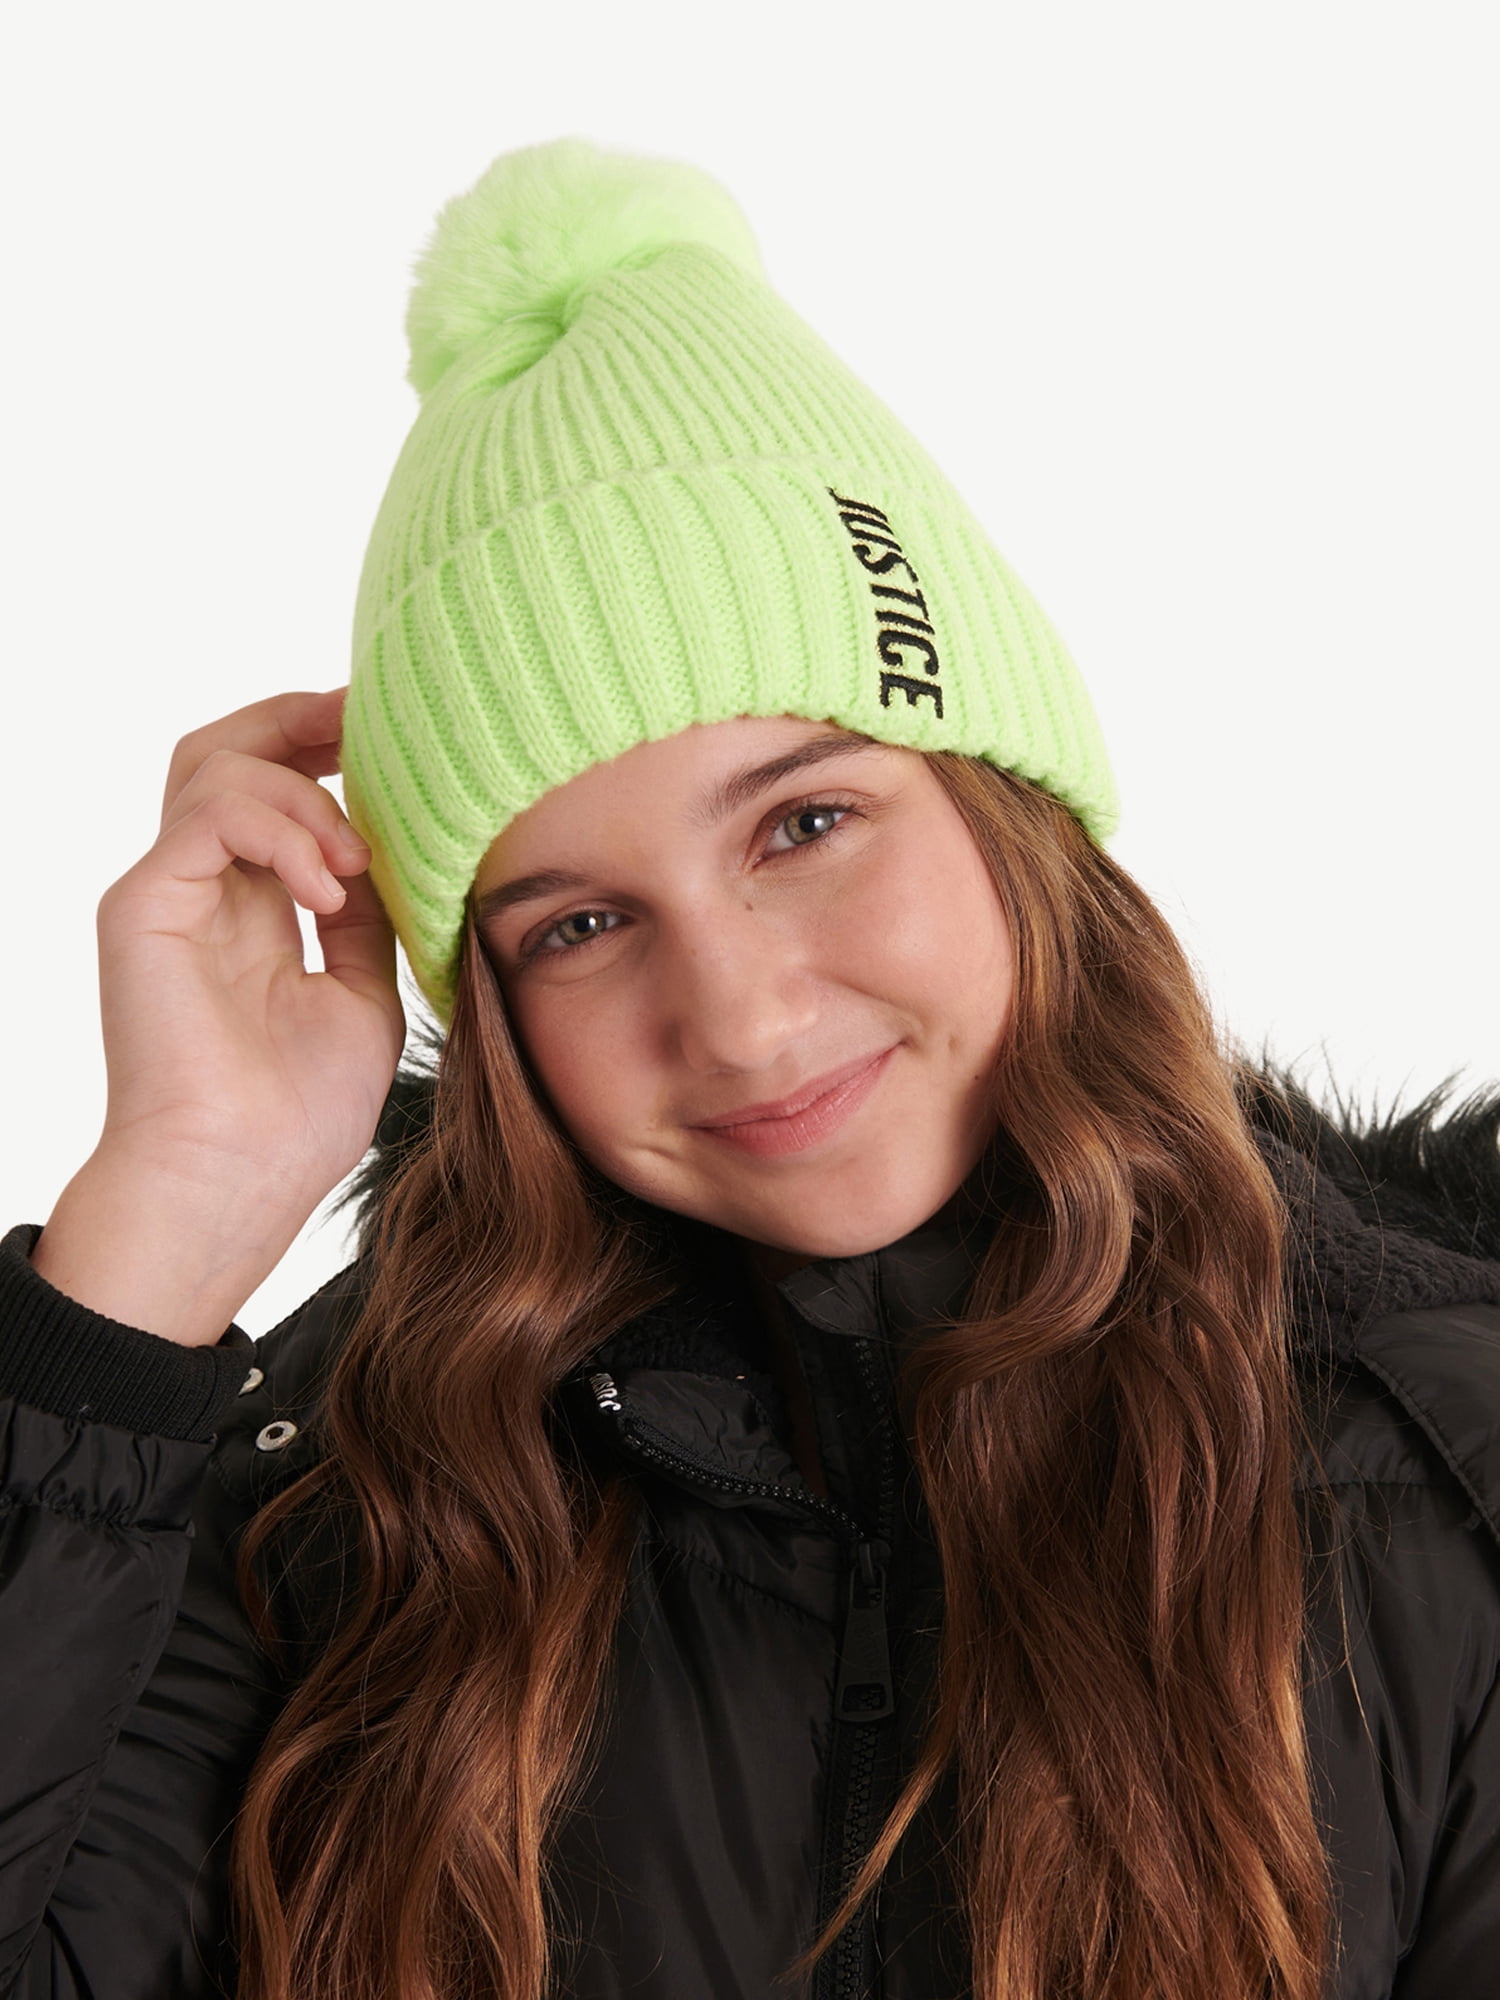 Justice Girls Solid Knit Beanie with Faux Fur Pom 